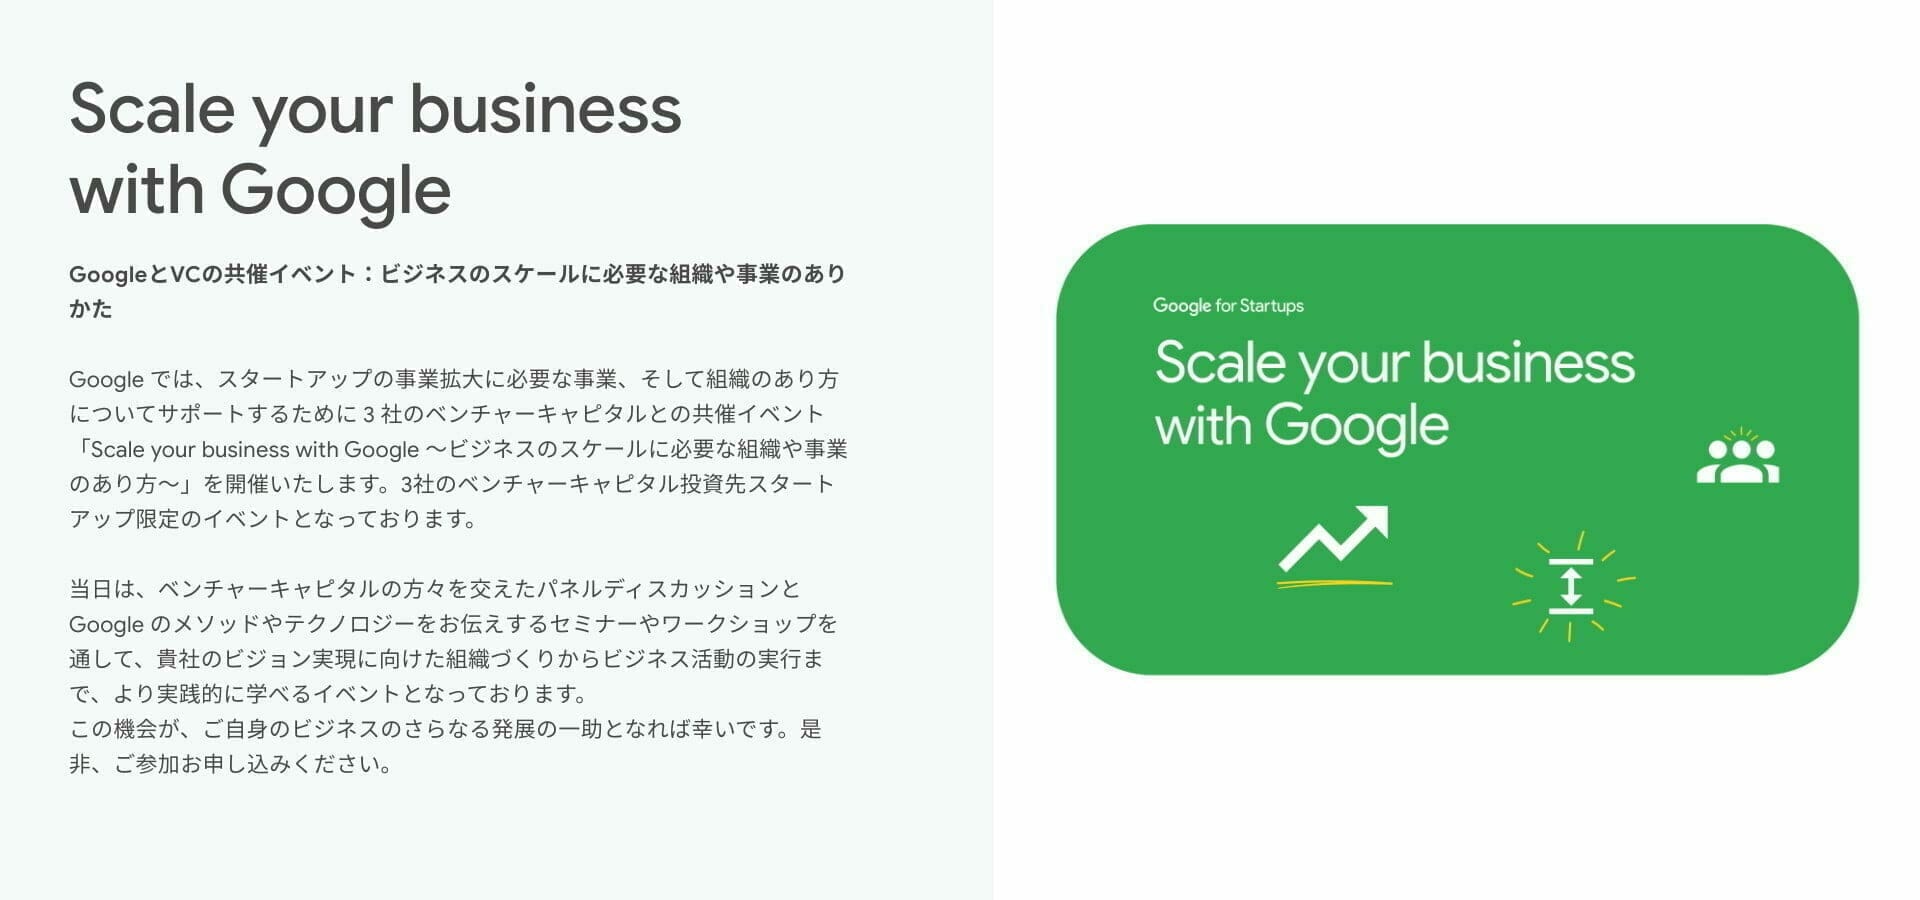 [Google for Startups] Scale your business with Google